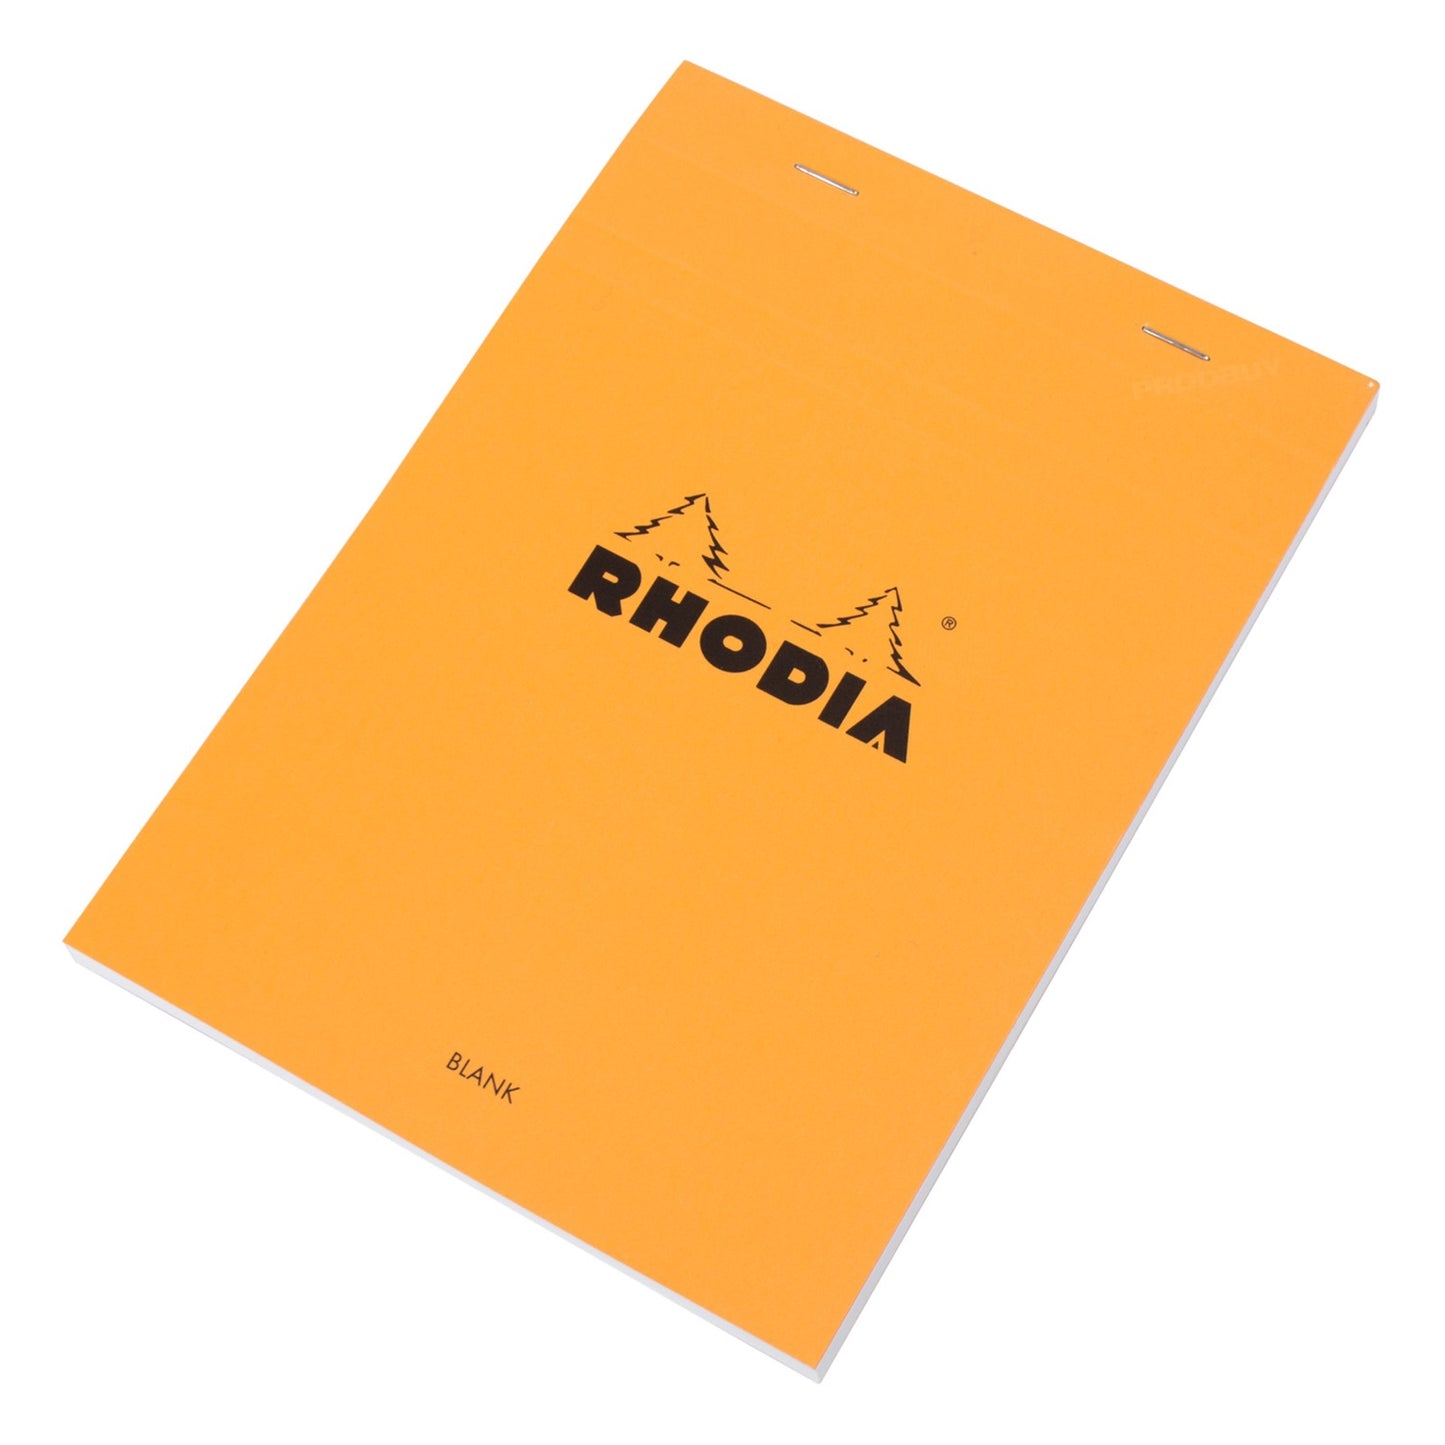 Set of 3 Rhodia A5 Blank Artist's Sketching Pads with Orange Covers & Plain White Sheets